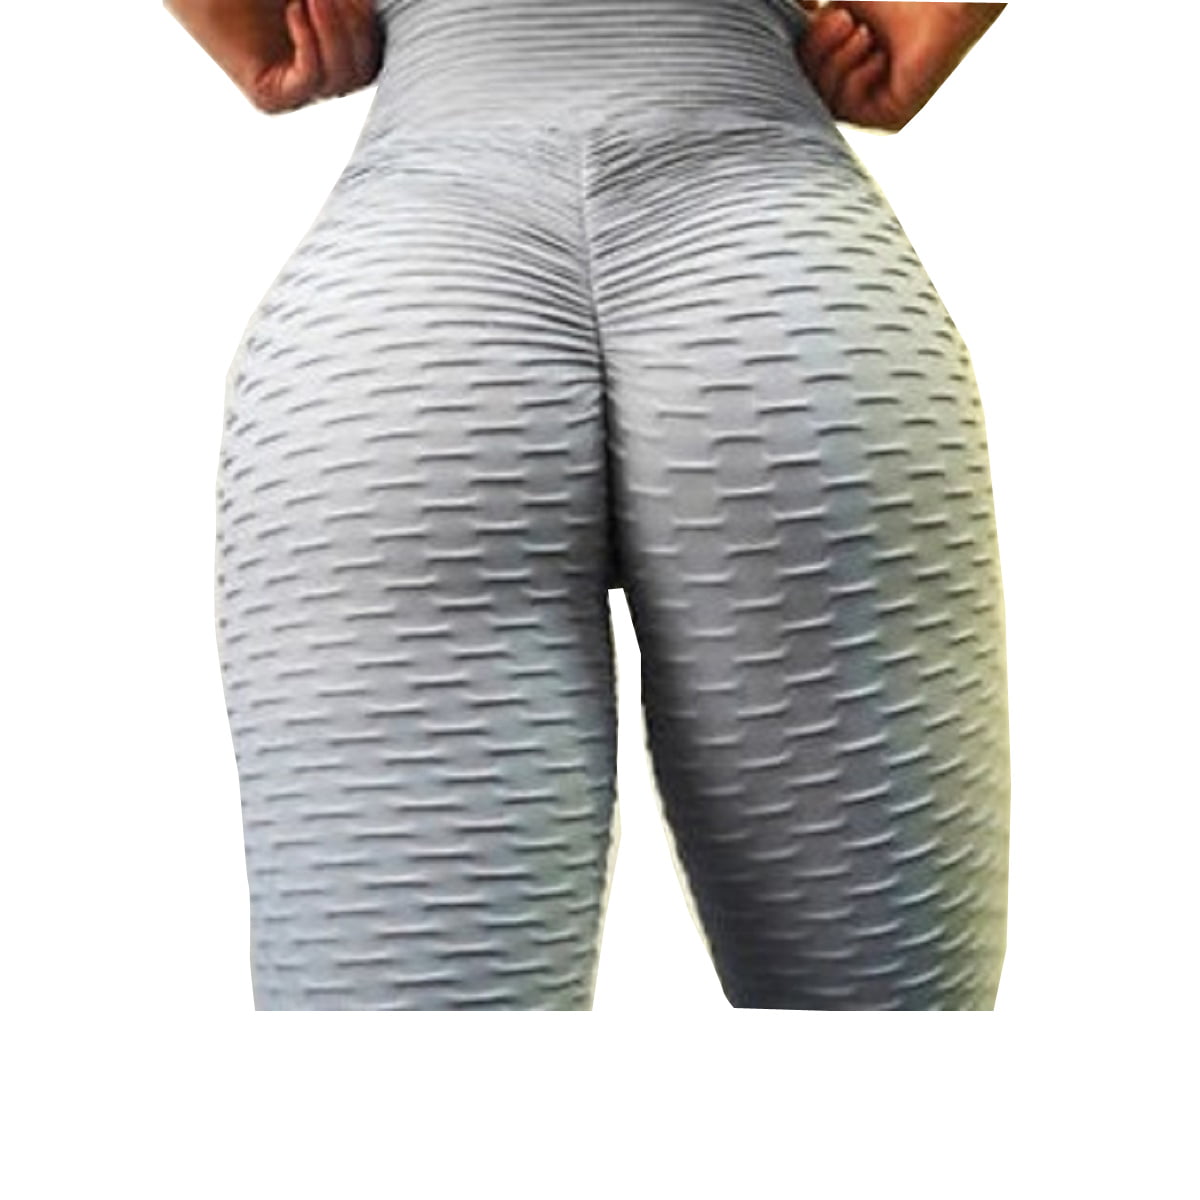 UK Women's Yoga Gym Anti-Cellulite Compression Leggings Butt Lifting Solid Pants 